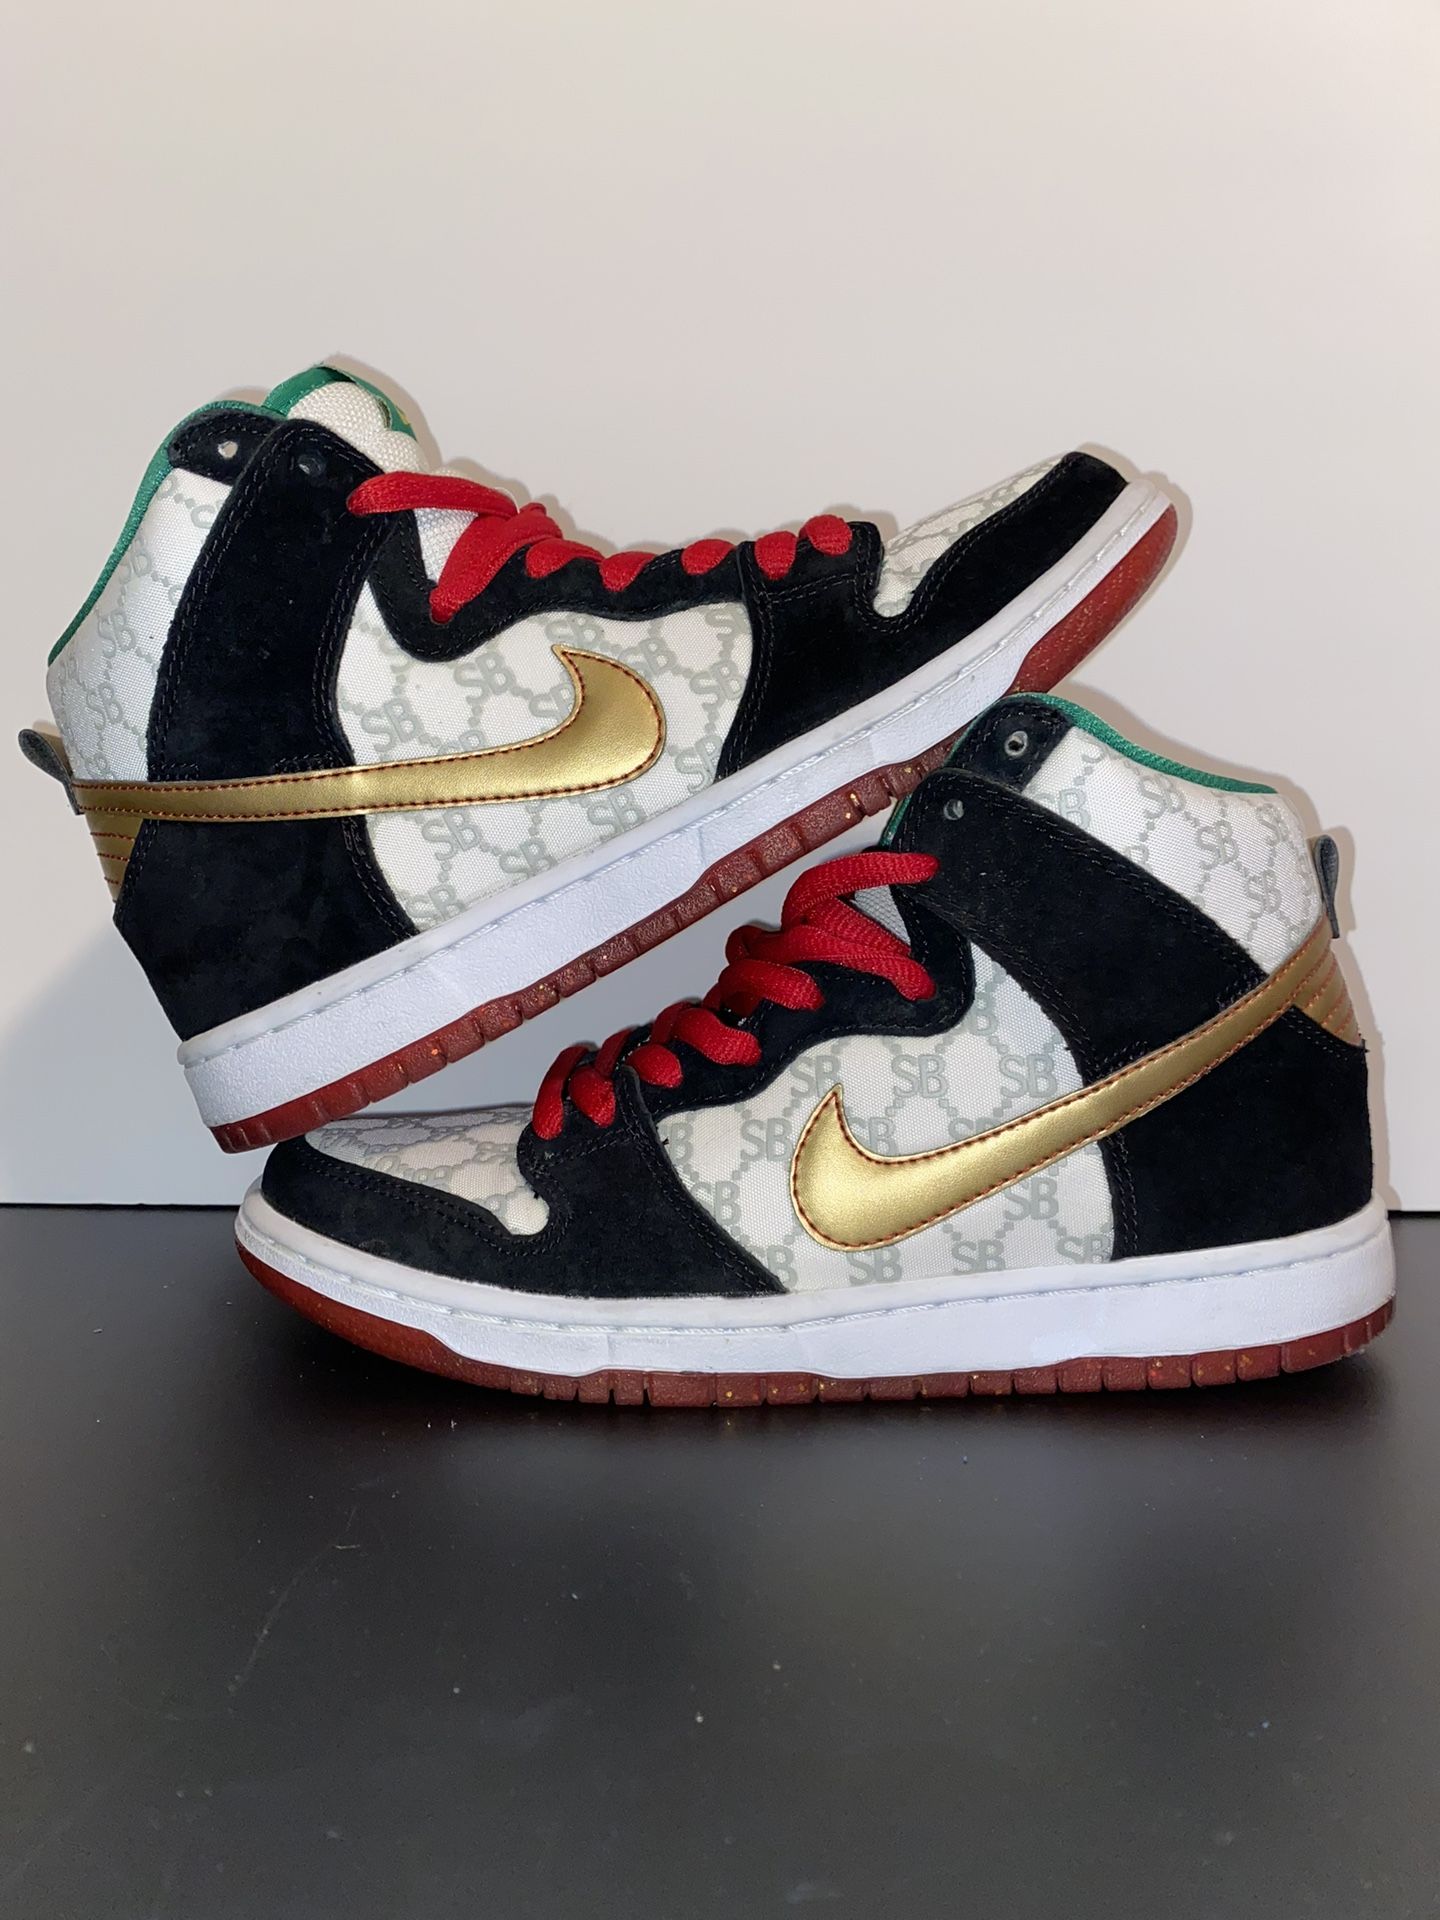 Verfrissend comfort Expliciet Nike SB Dunk High Gucci Black Sheep Size 6.5 for Sale in Miami, FL - OfferUp